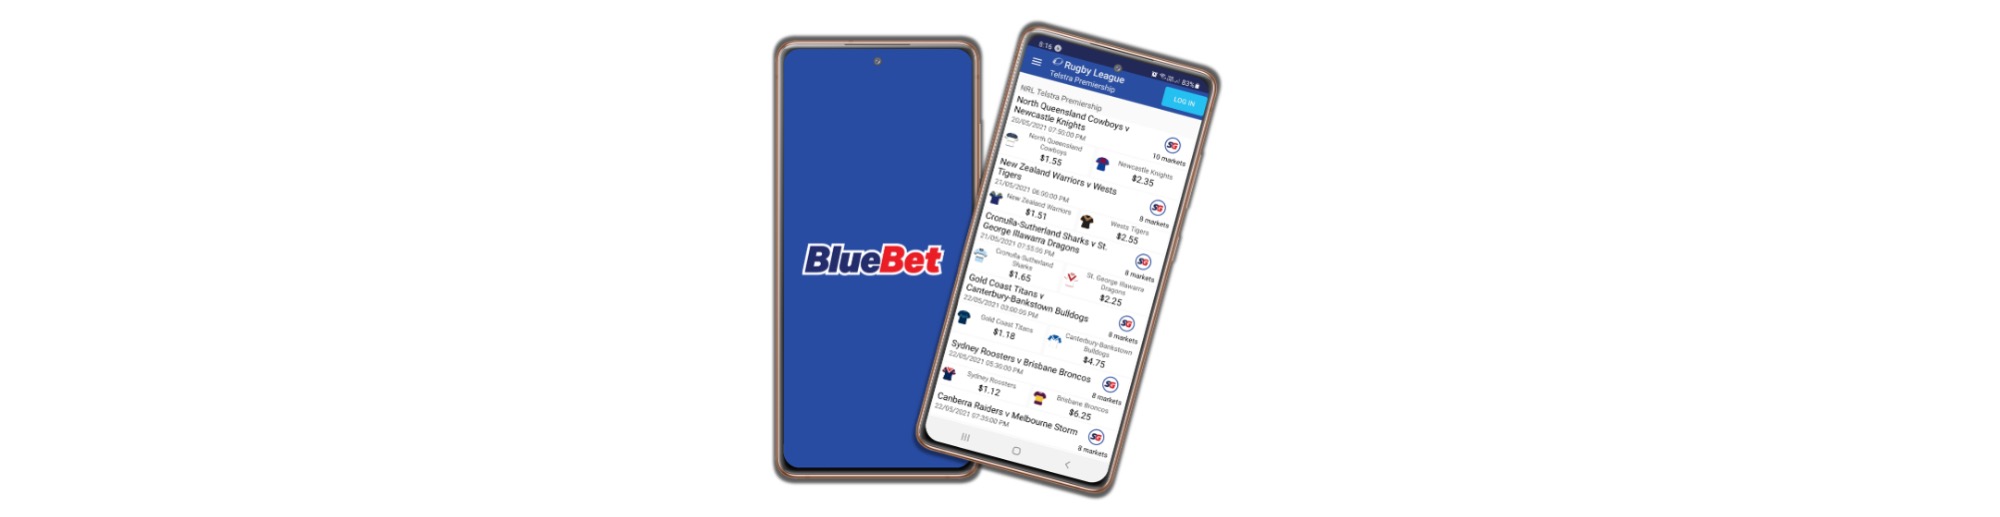 Bluebet Android App